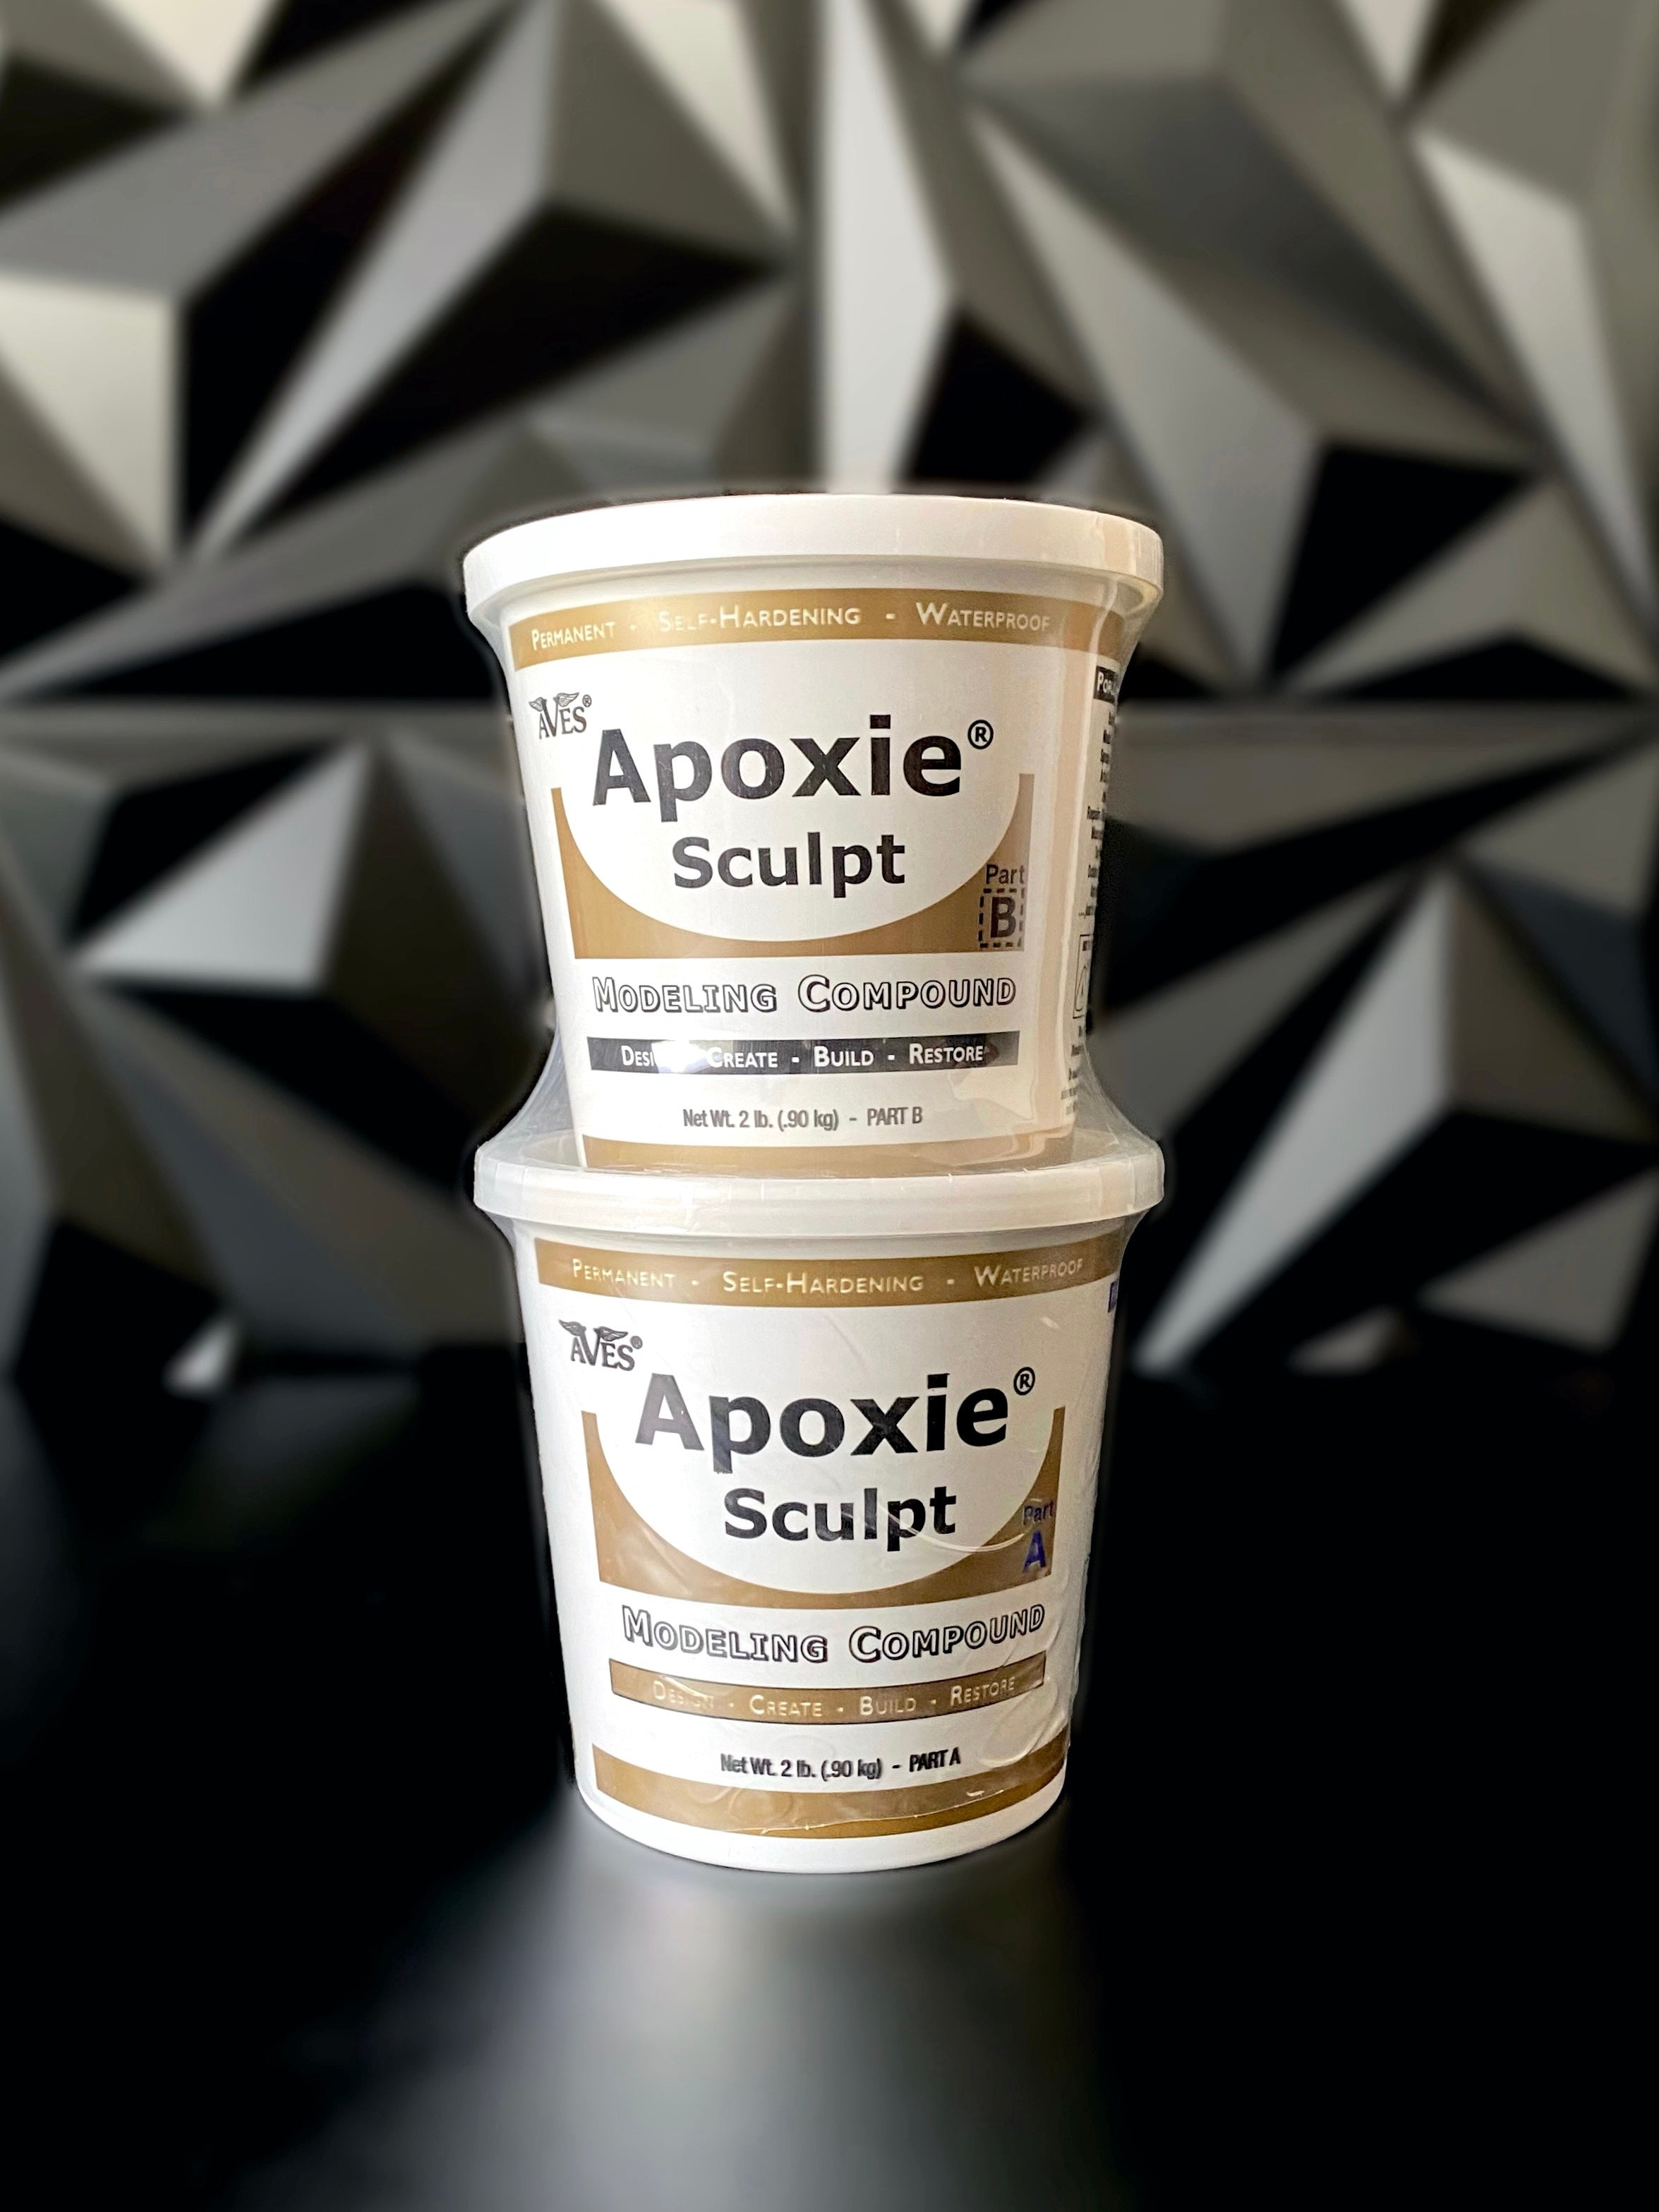 Apoxie Sculpt - PART B - Aves: Maker of Fine Clays and Maches